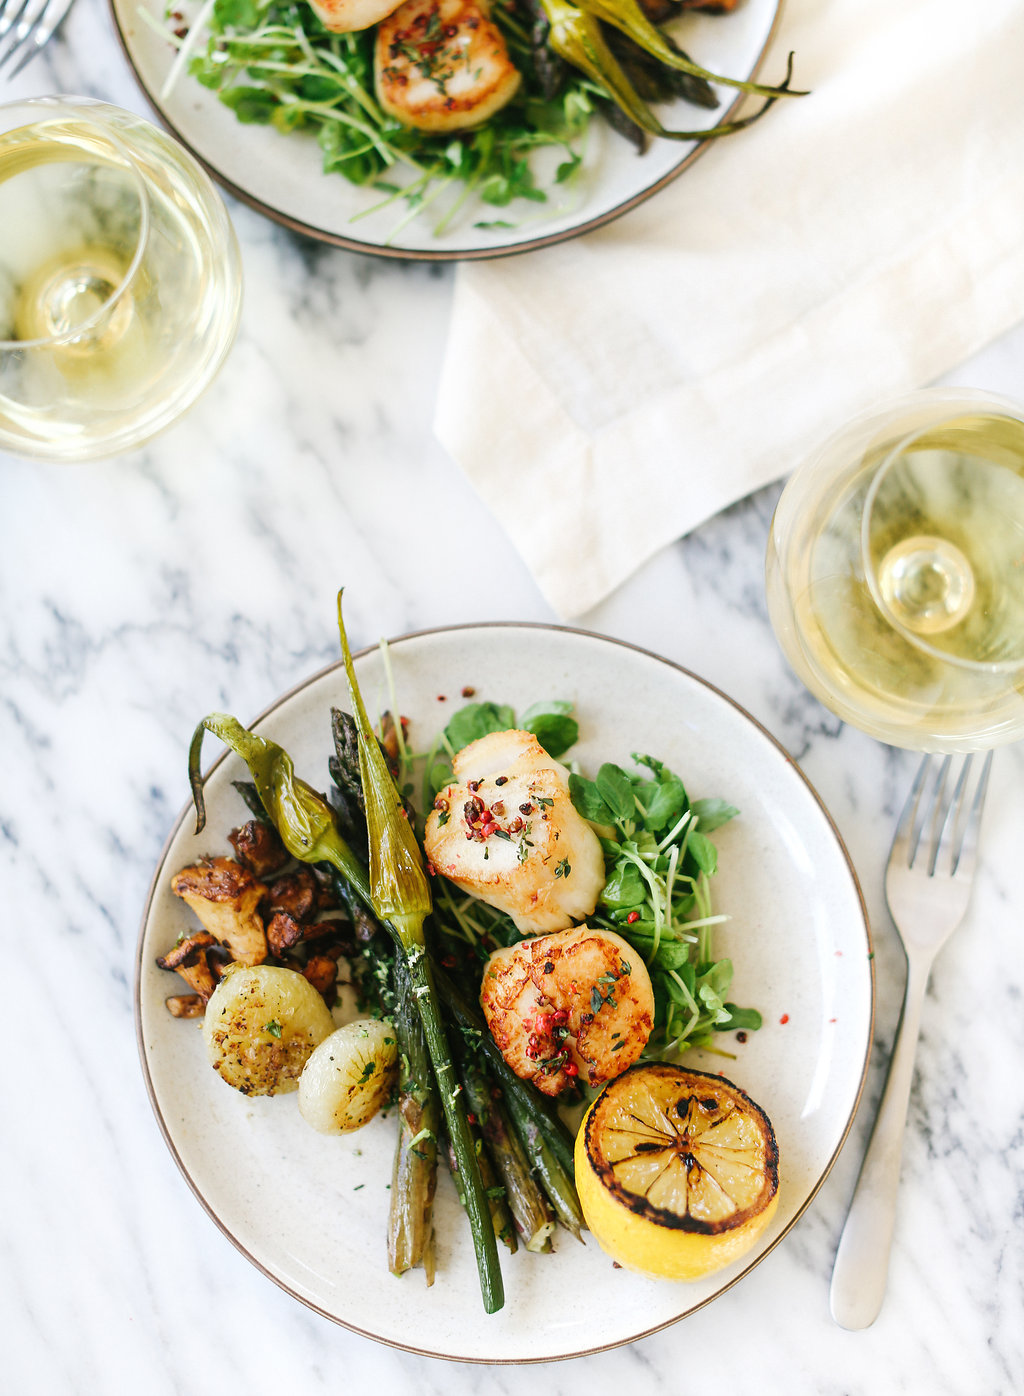 Less than an hour and you've got yourself a delicious pan-seared scallops meal that is perfect for a date-night on the patio, dinner with friends, or just a fun way to spice up your daily dinner.